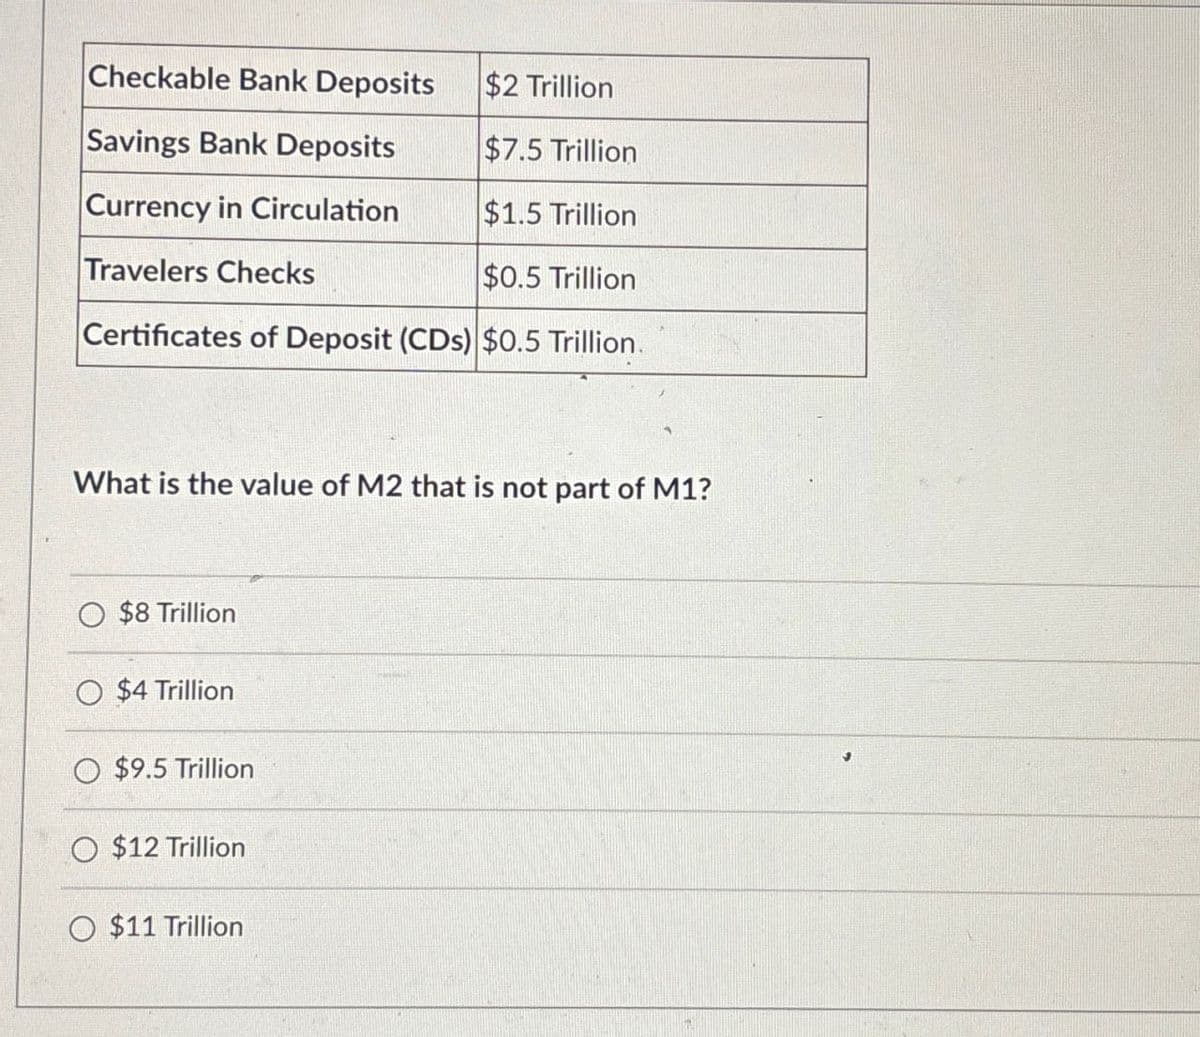 Checkable Bank Deposits
$2 Trillion
Savings Bank Deposits
$7.5 Trillion
Currency in Circulation
$1.5 Trillion
Travelers Checks
$0.5 Trillion
Certificates of Deposit (CDs) $0.5 Trillion.
What is the value of M2 that is not part of M1?
$8 Trillion
$4 Trillion
O $9.5 Trillion
O $12 Trillion
O $11 Trillion